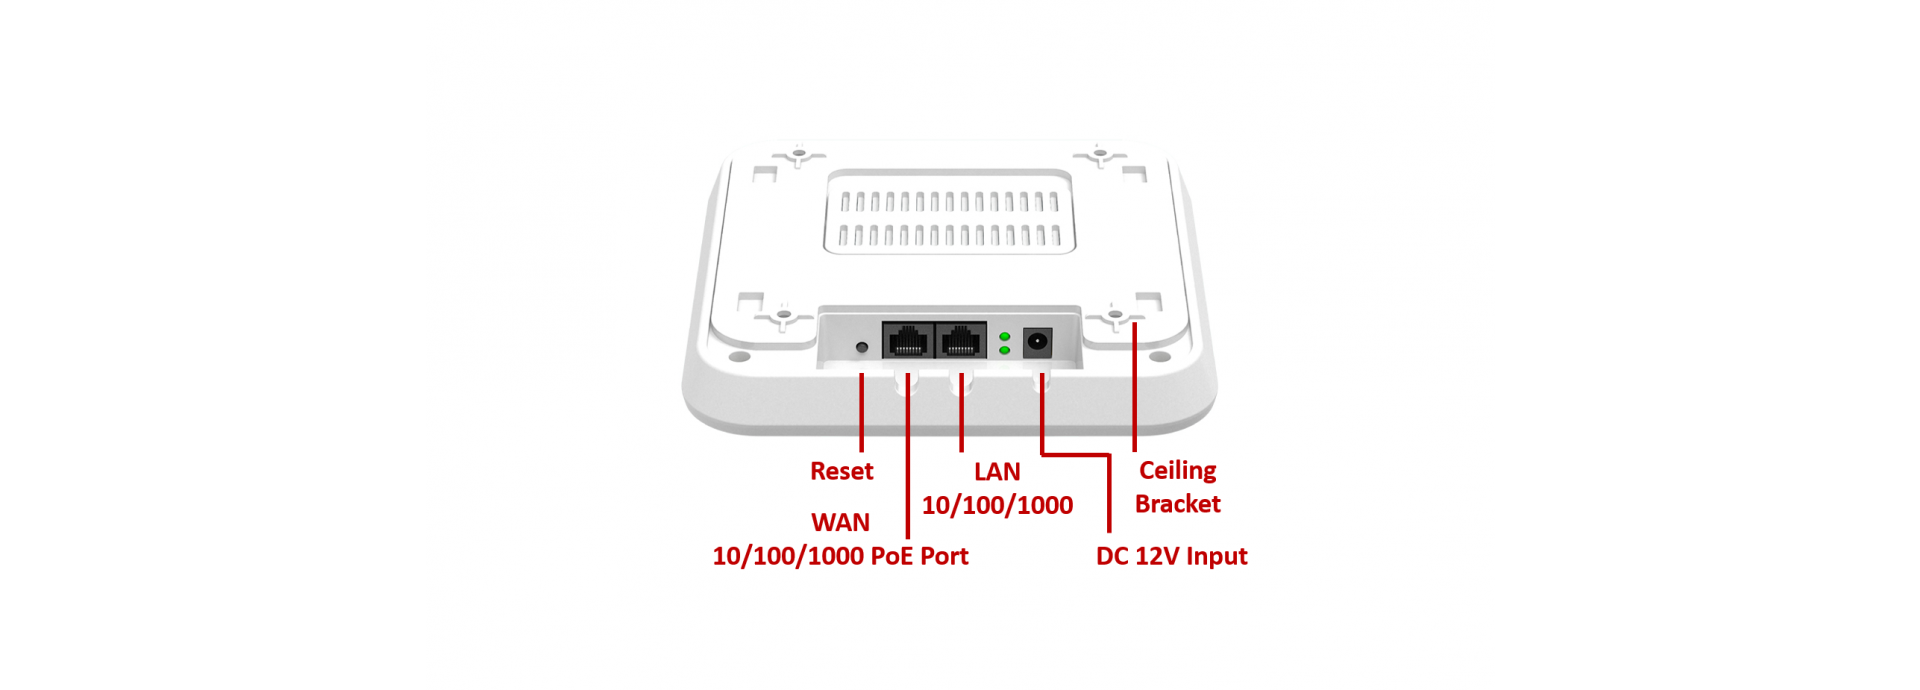 Multi function High Speed Access Point